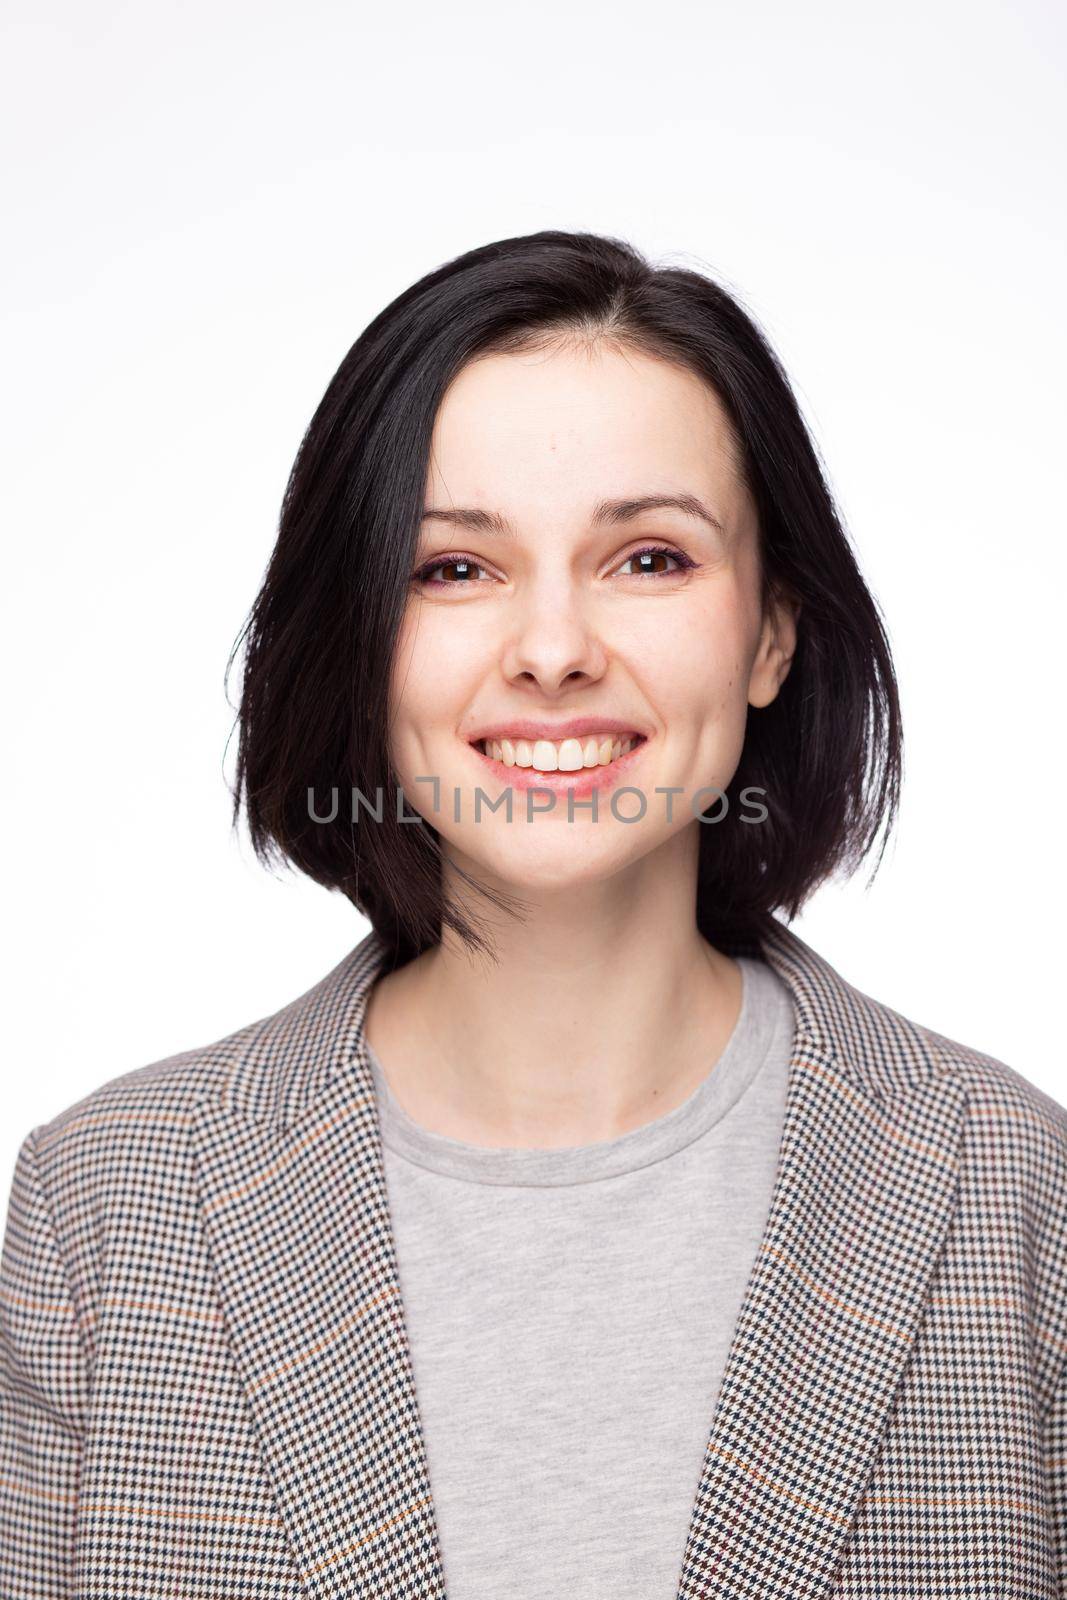 emotional woman in a gray t-shirt and jacket, white background by shilovskaya